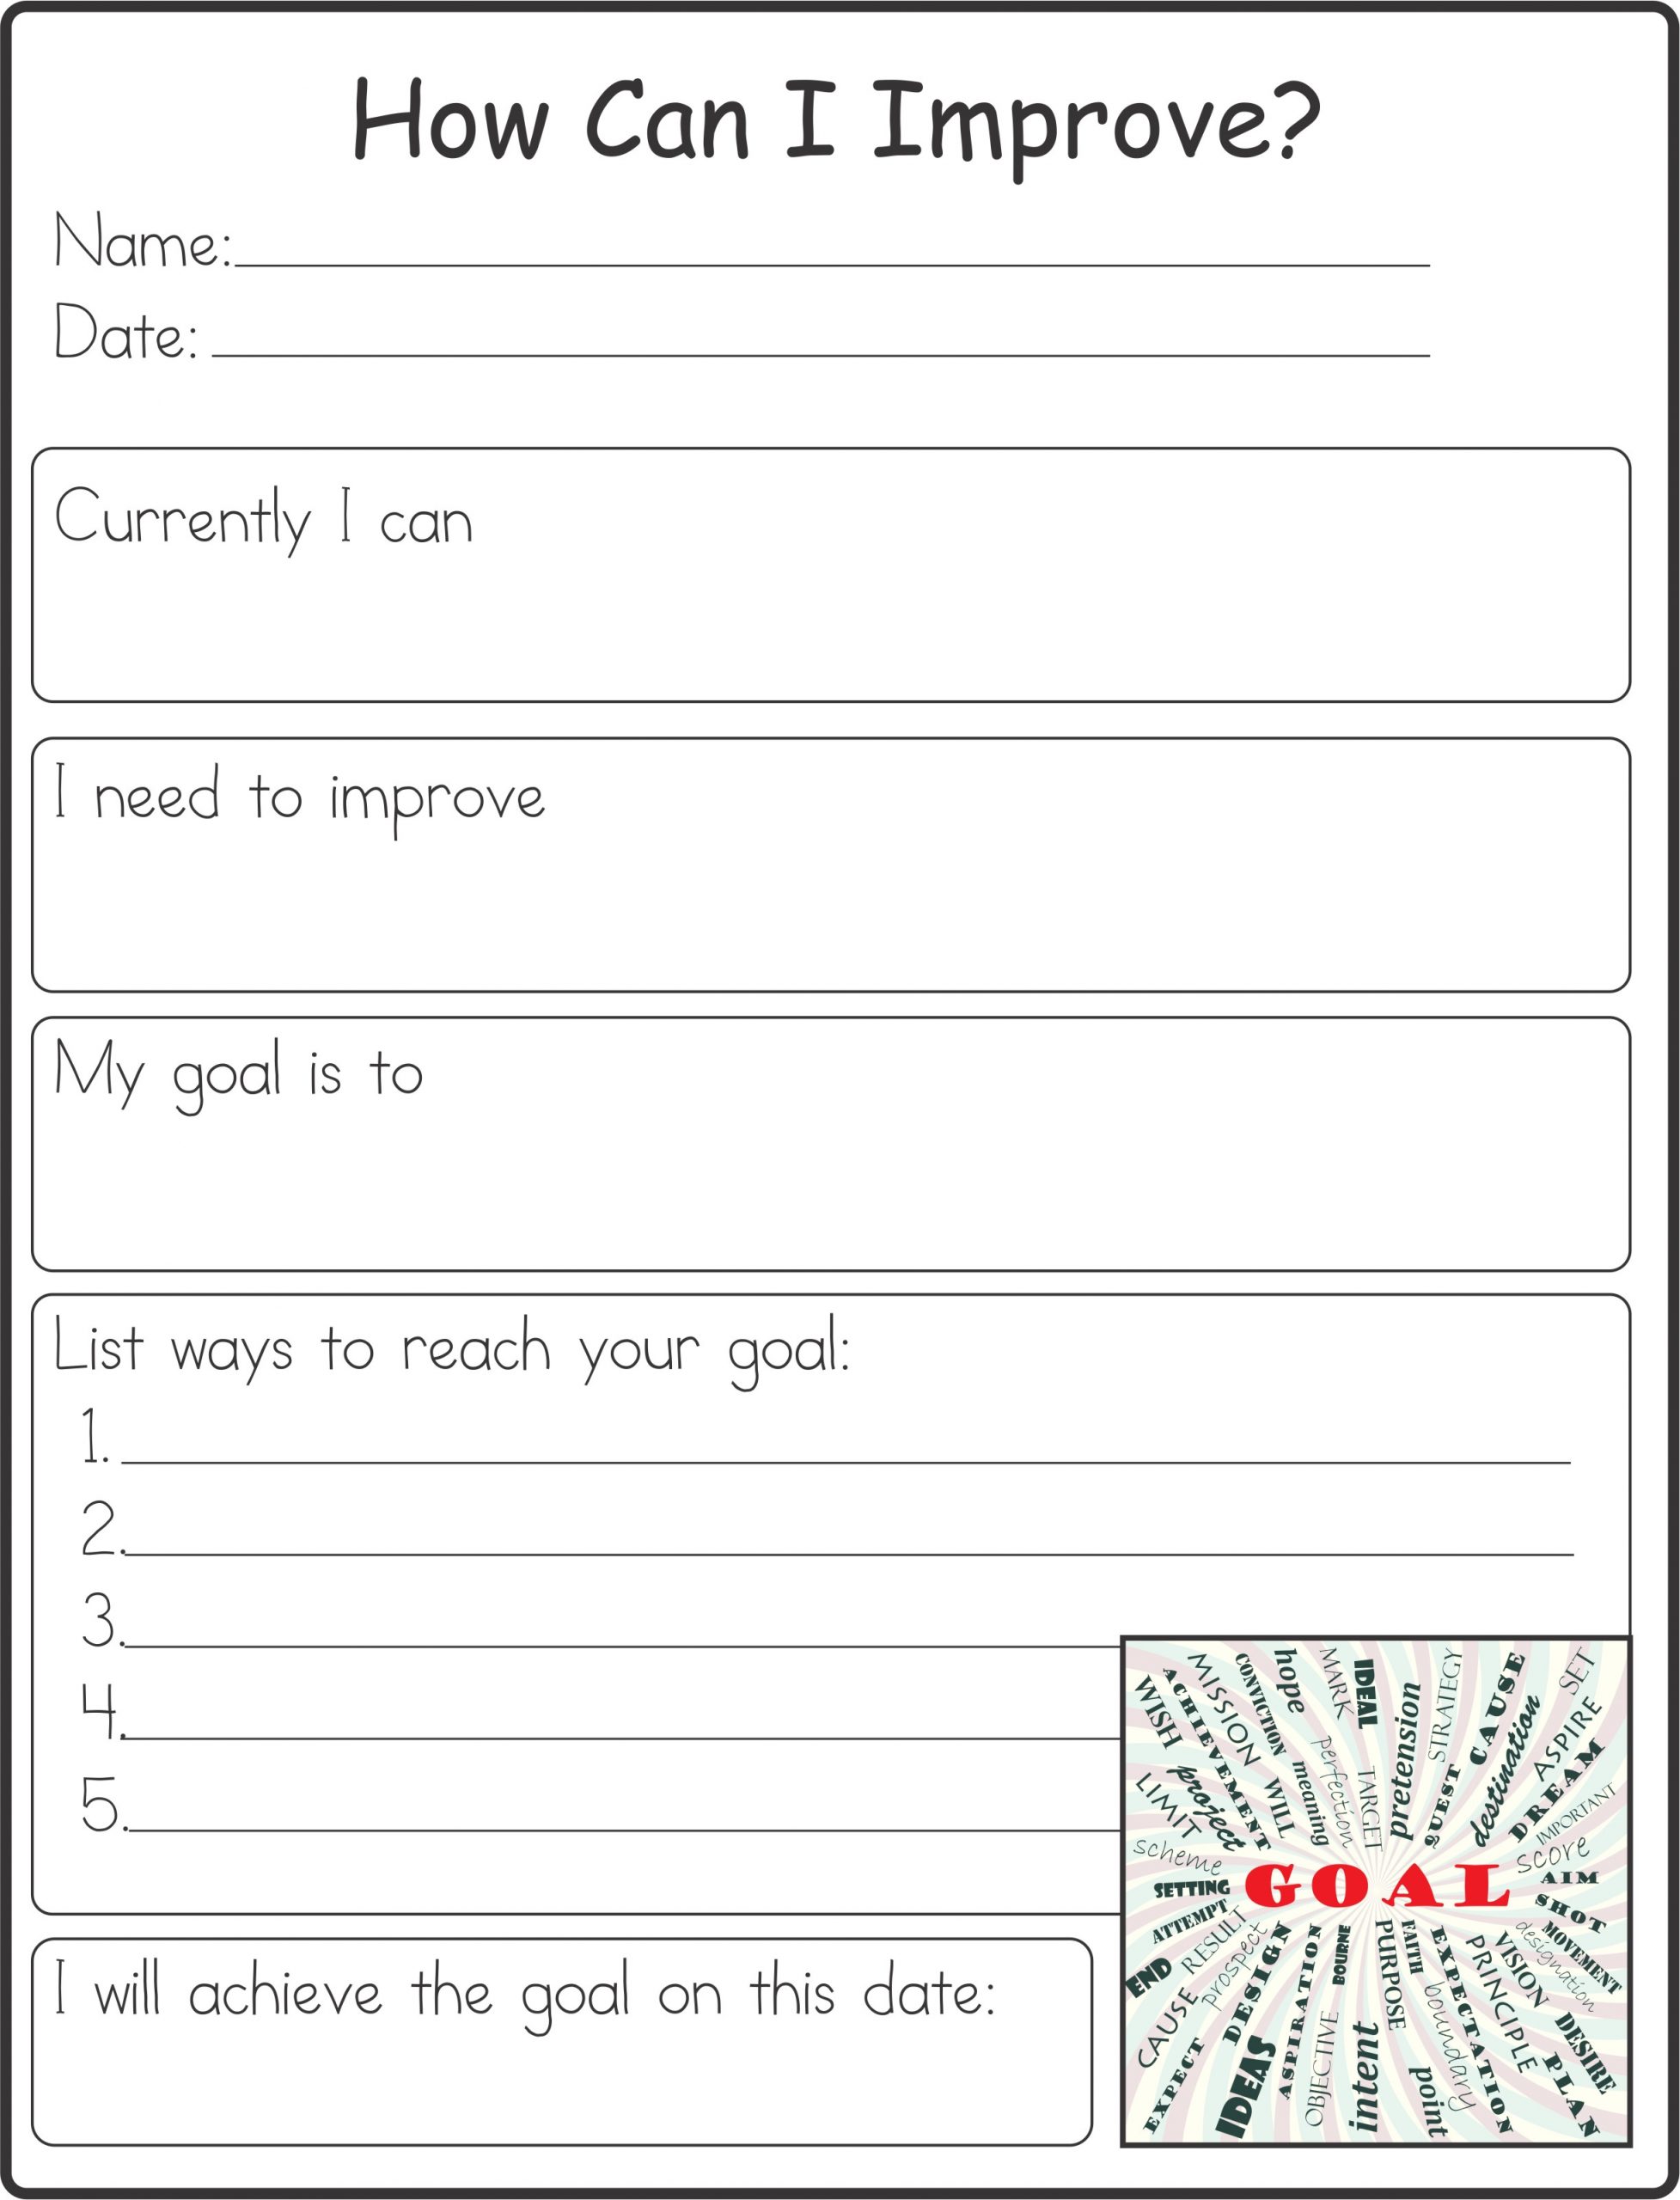 Self Esteem Worksheet for Adults Self Improvement to Help Achieve Goals Your therapy source